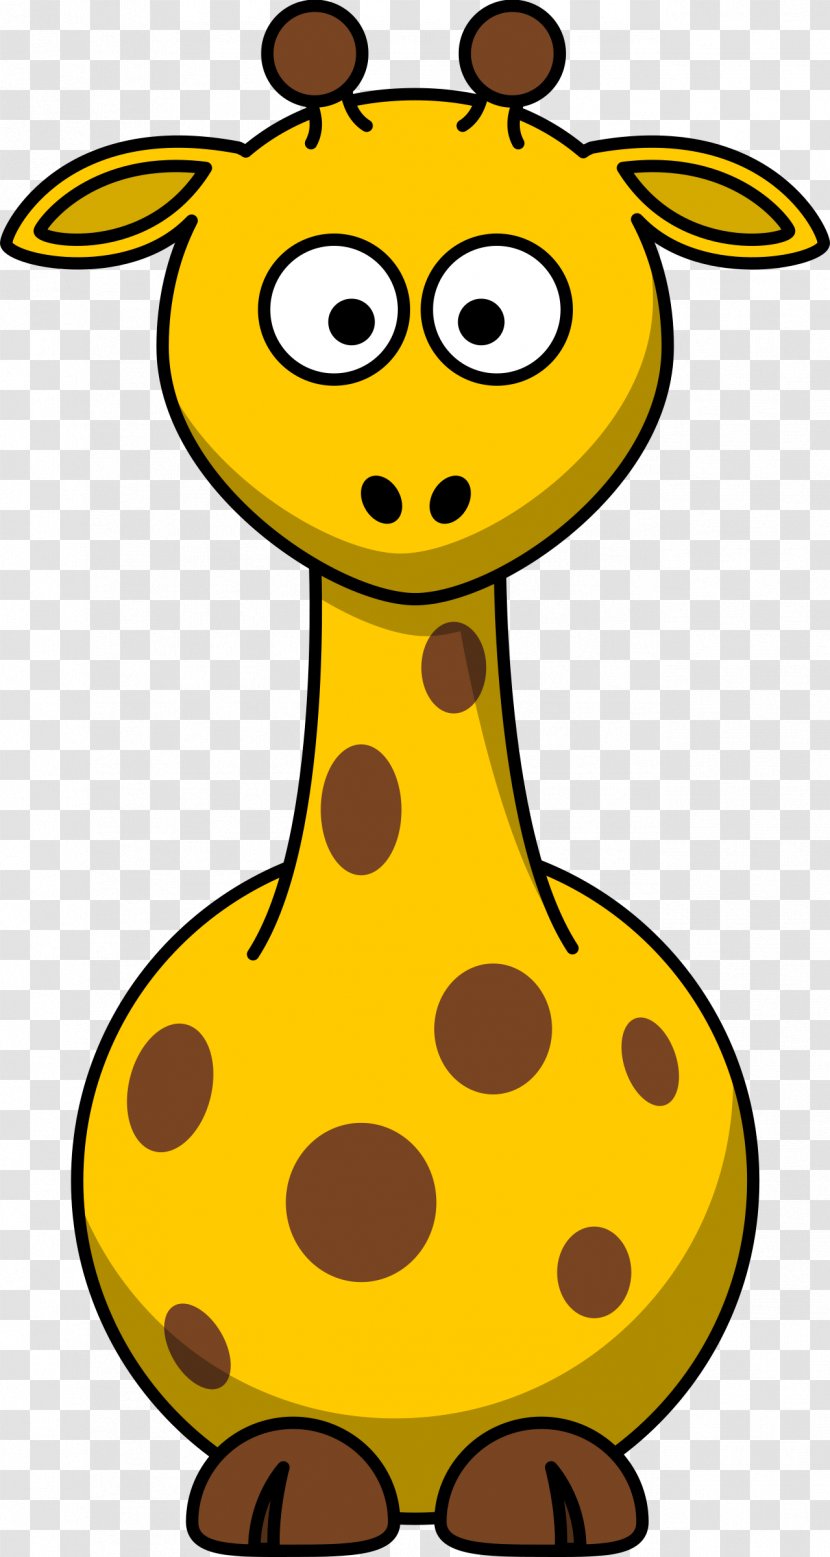 Giraffe Cartoon Drawing Clip Art - Membrane Winged Insect Transparent PNG